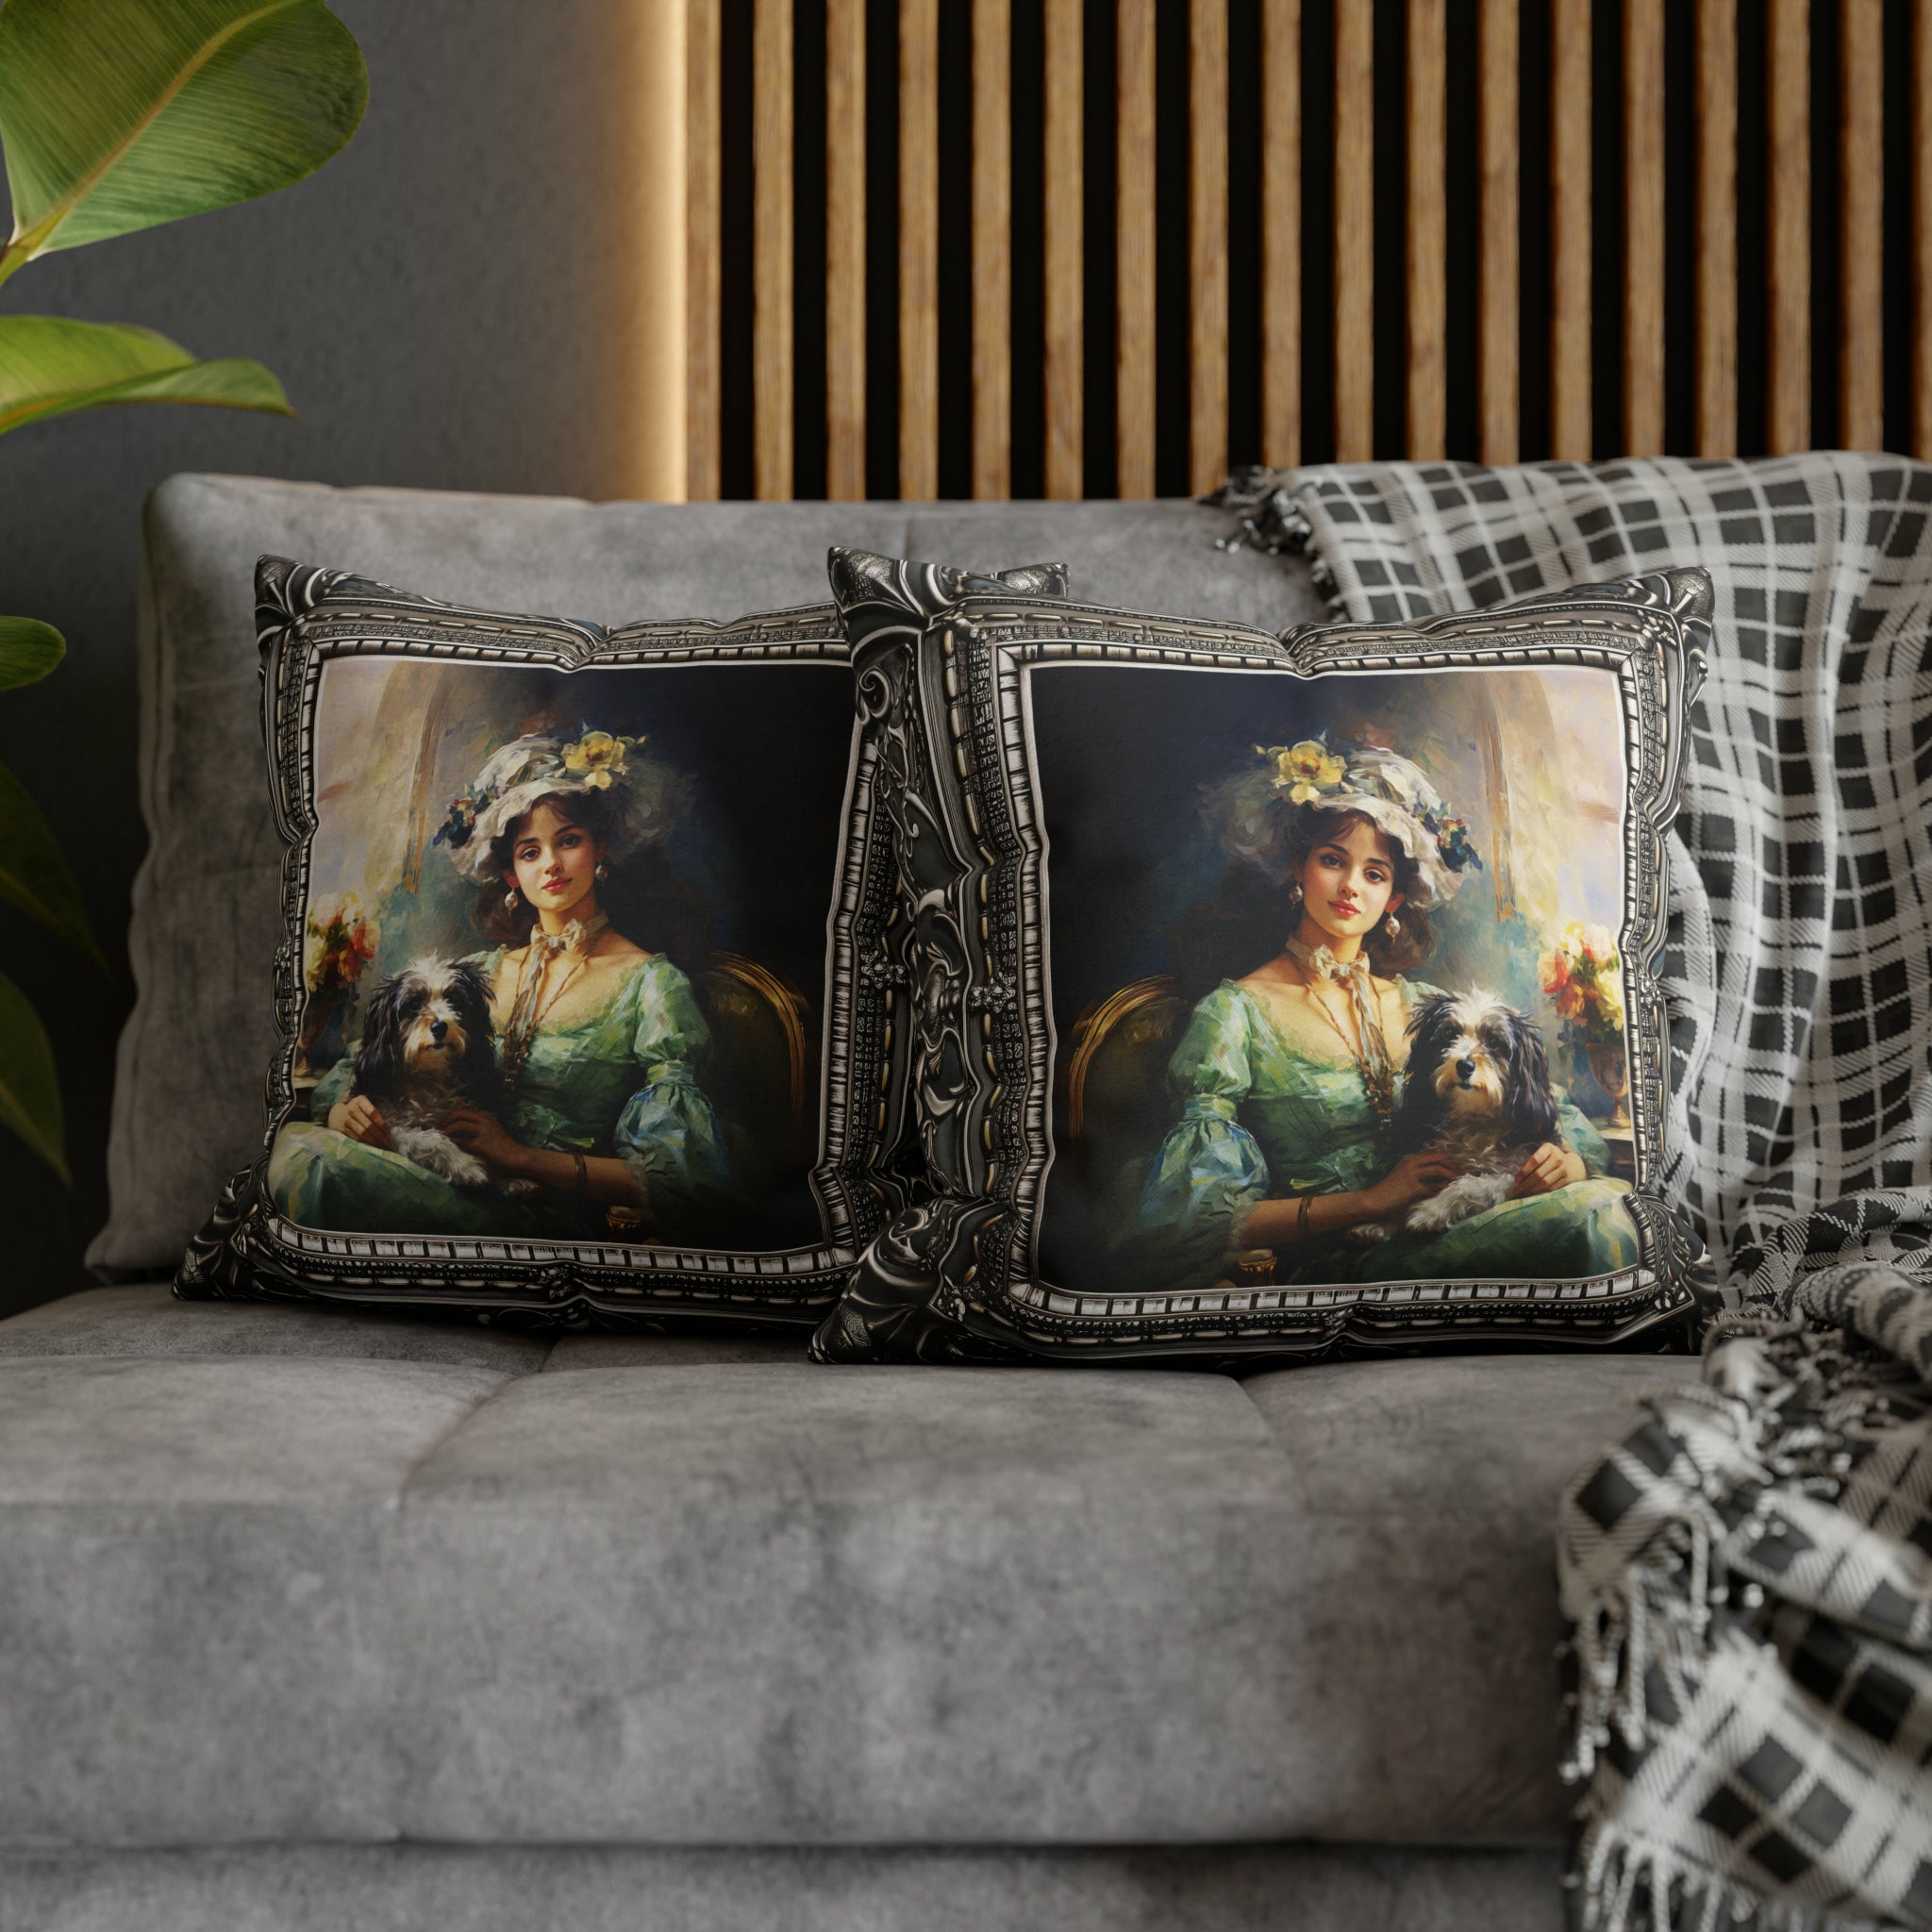 Square Pillow Case 18" x 18", CASE ONLY, no pillow form, original Art , a Painting of a Young Woman and her Dog in an Antique Frame